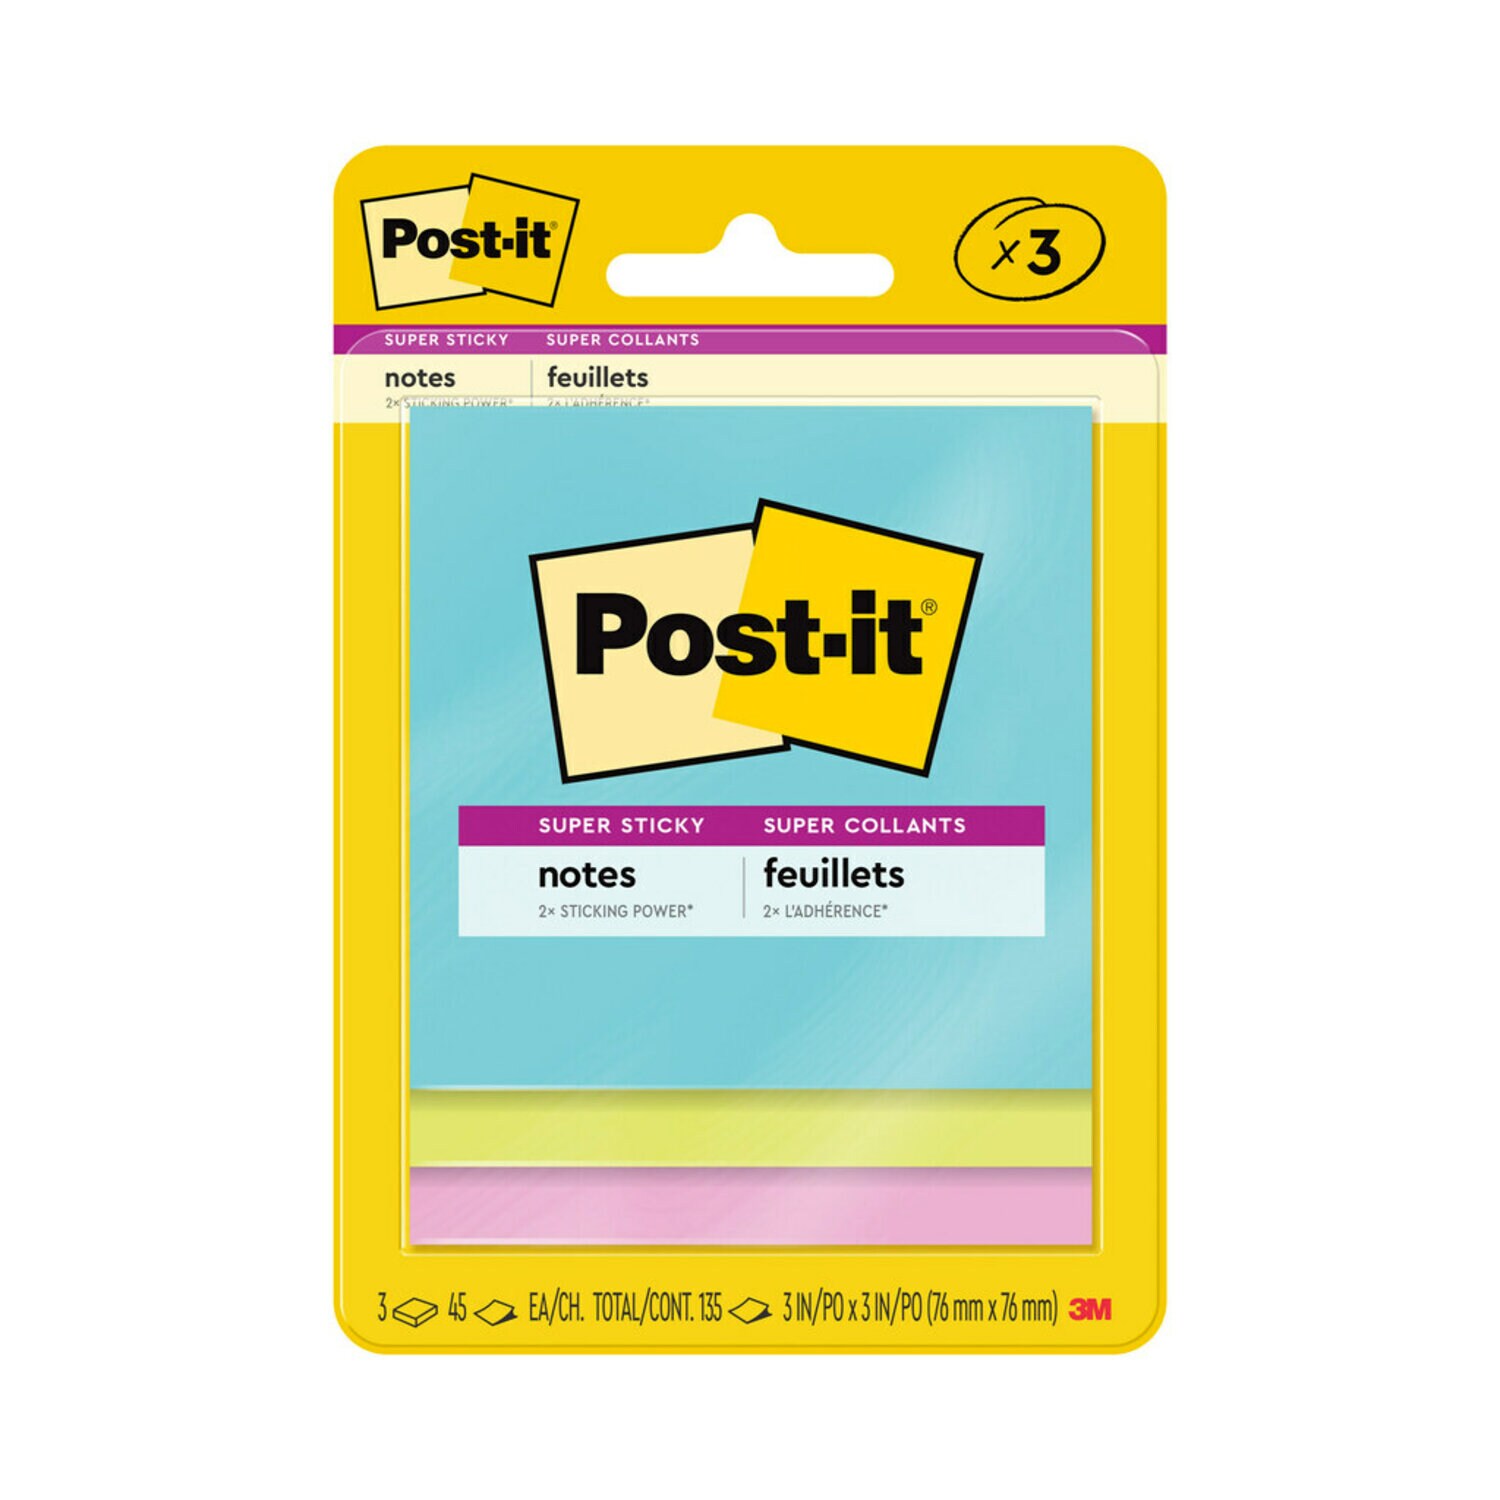 7100242065 - Post-it Super Sticky Notes 3321-SSMIA, 3 in x 3 in (76 mm x 76 mm), Supernova Neons Collection